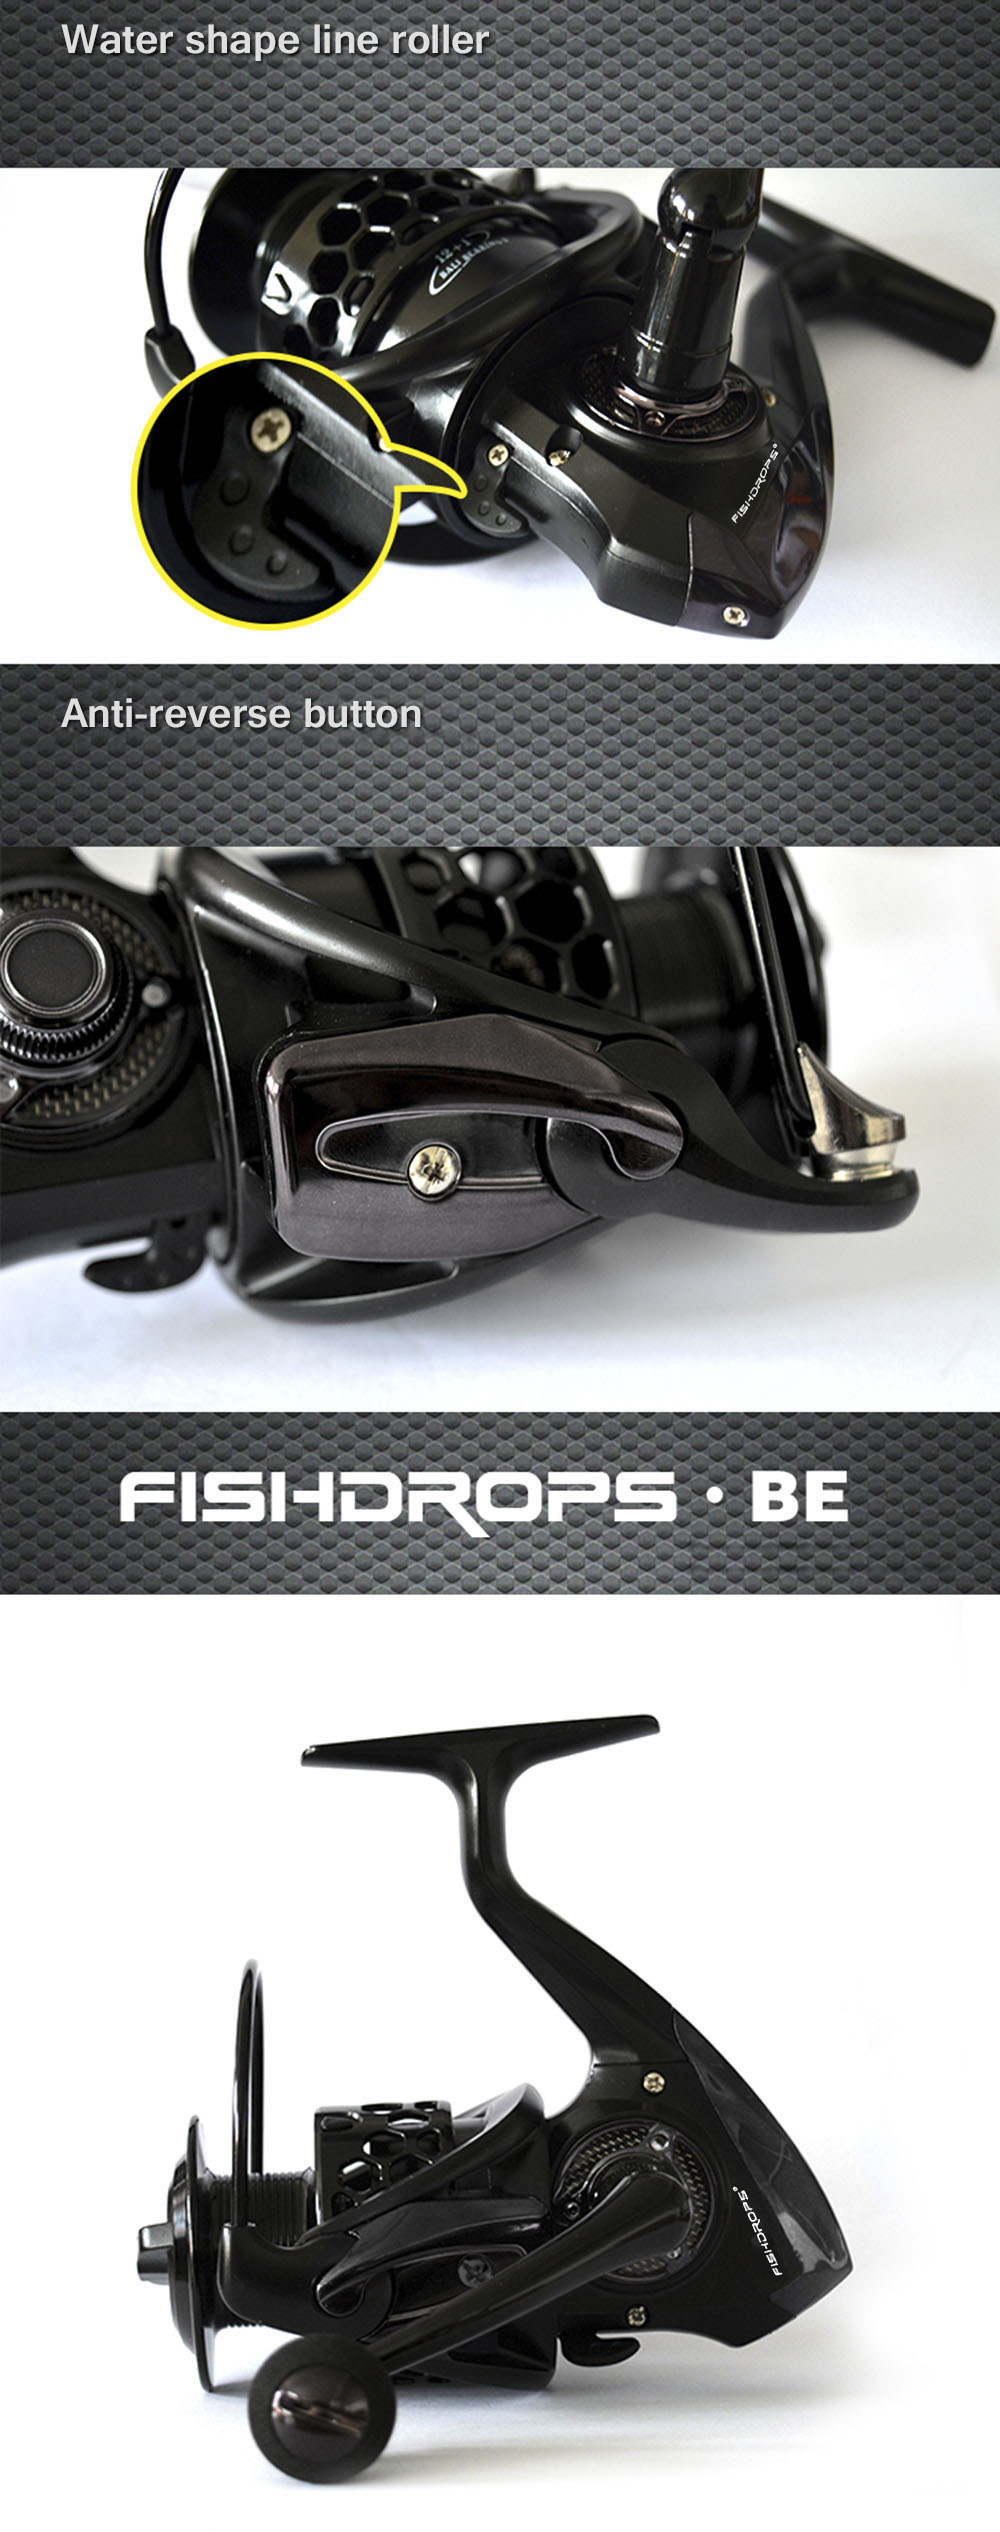 FISHDROPS Full Metal Fishing Spinning Reel with Foldable Handle